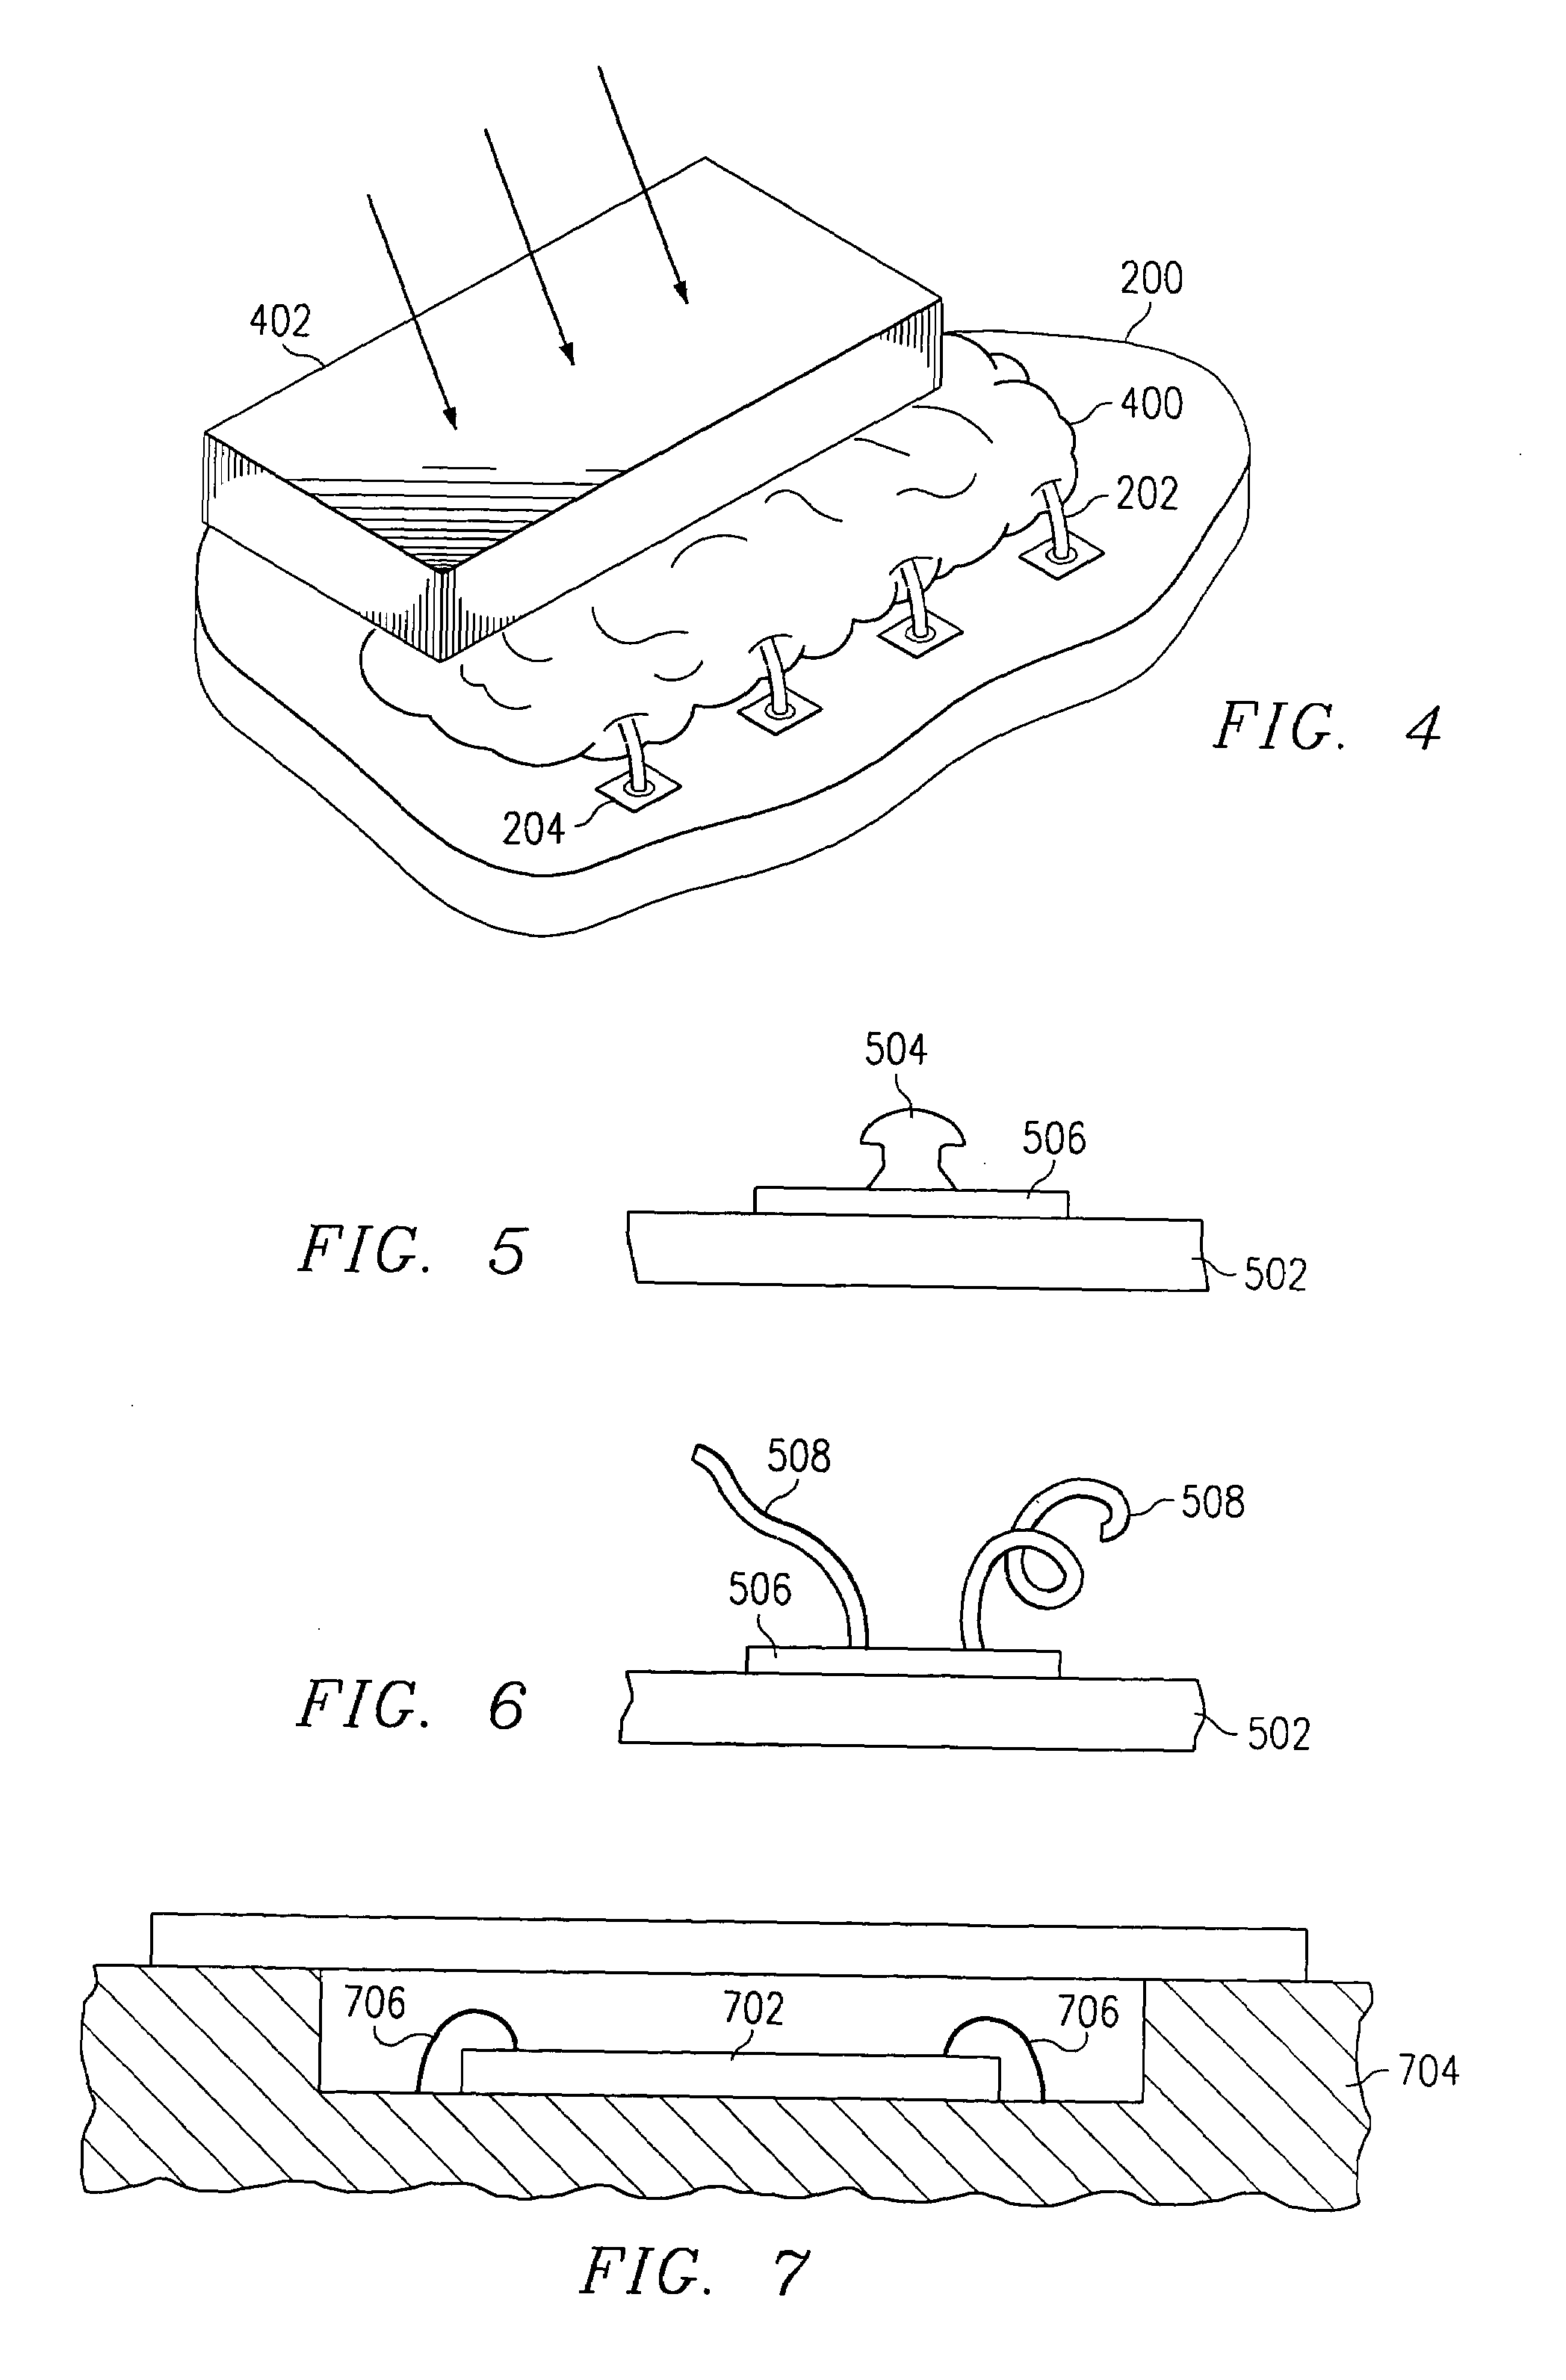 Anchor for device package